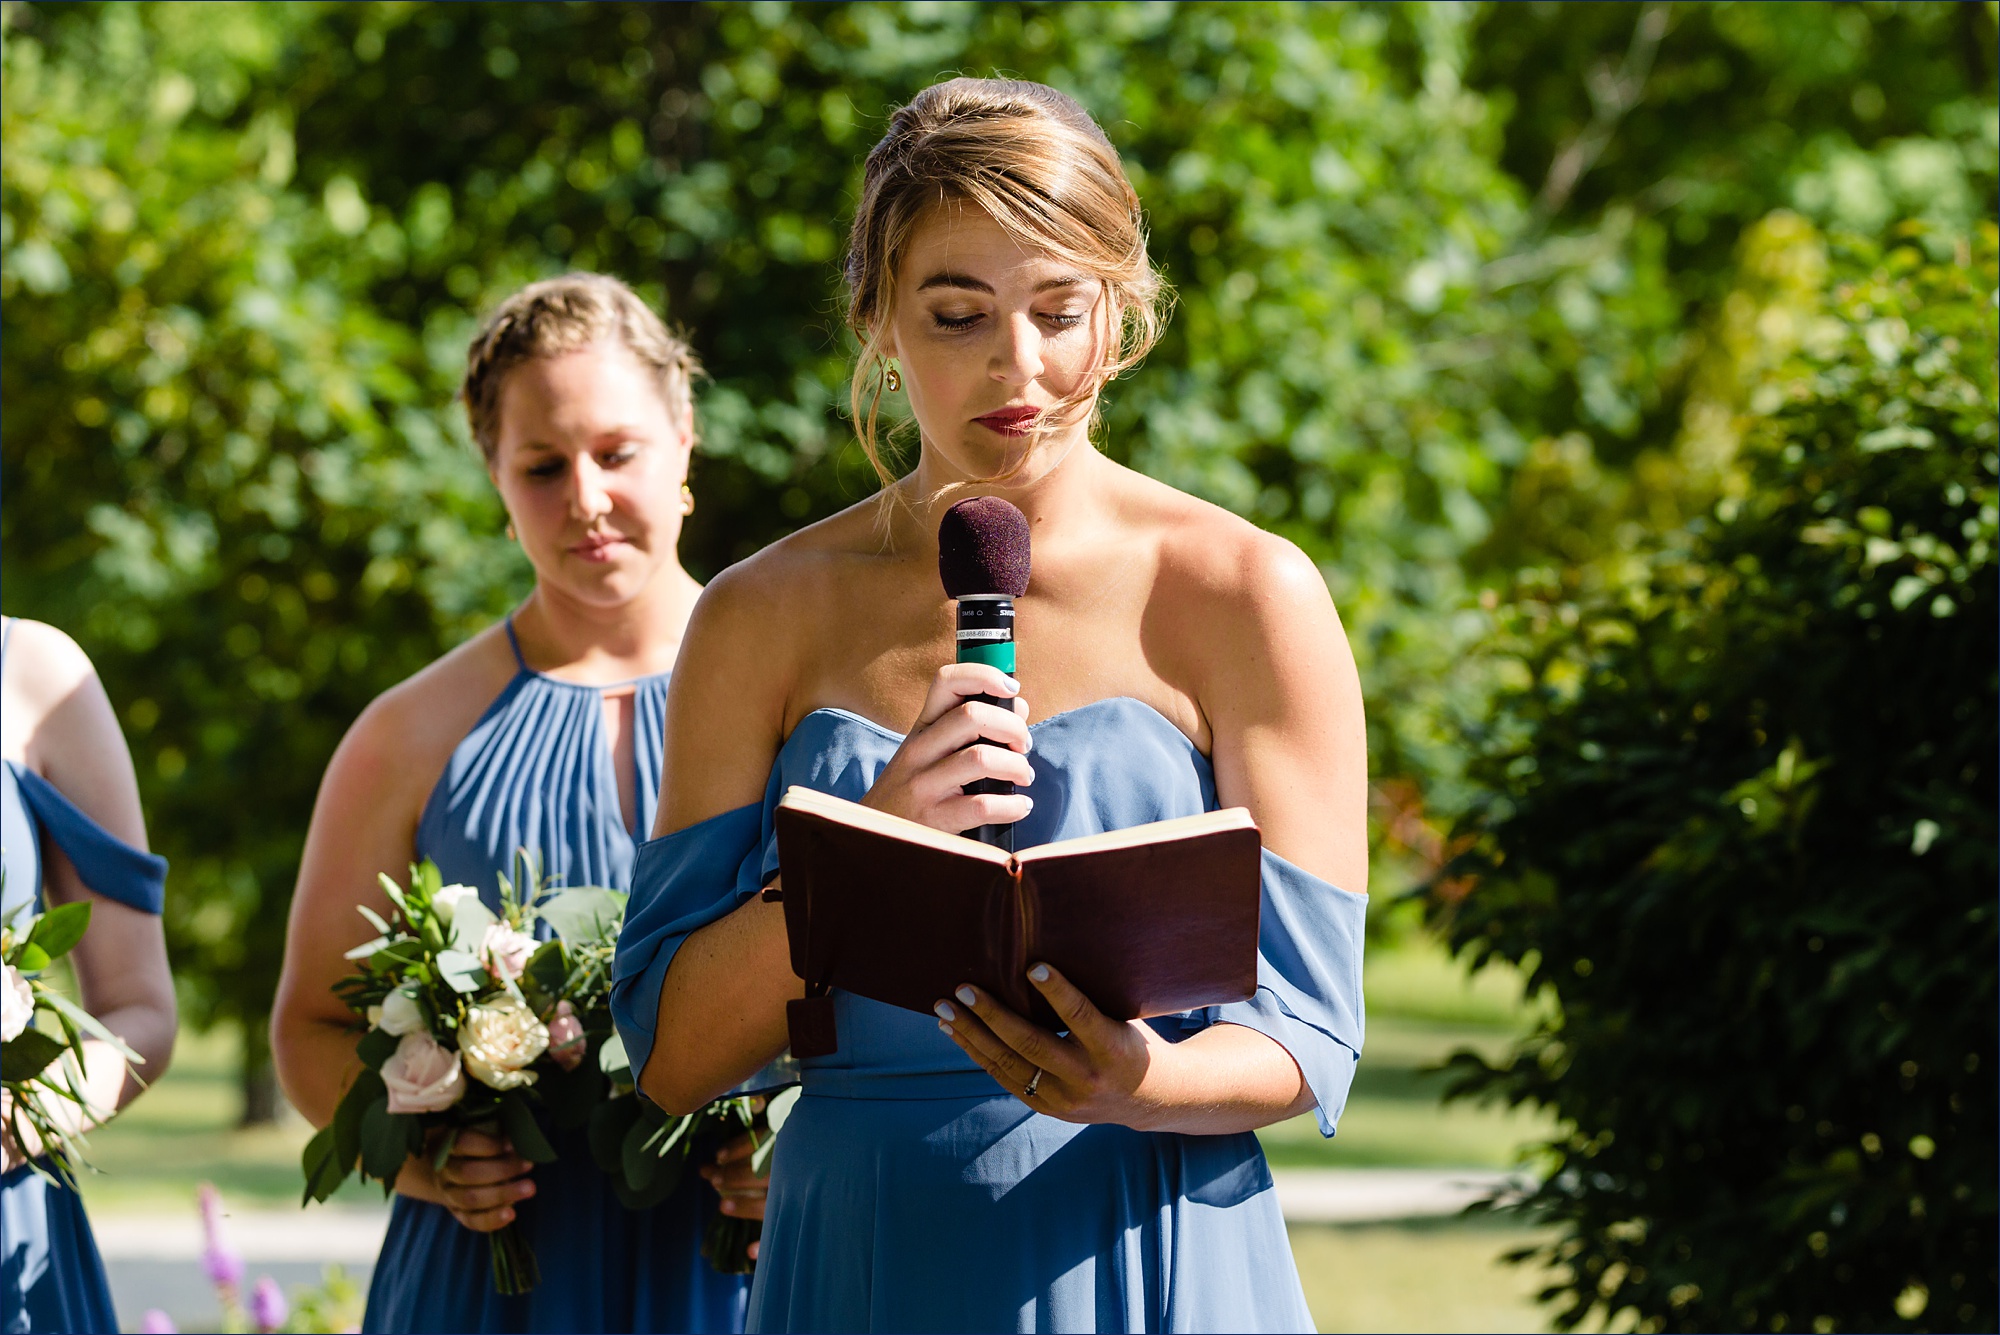 Bridesmaid reads a poem during the outdoor ceremony in the summer